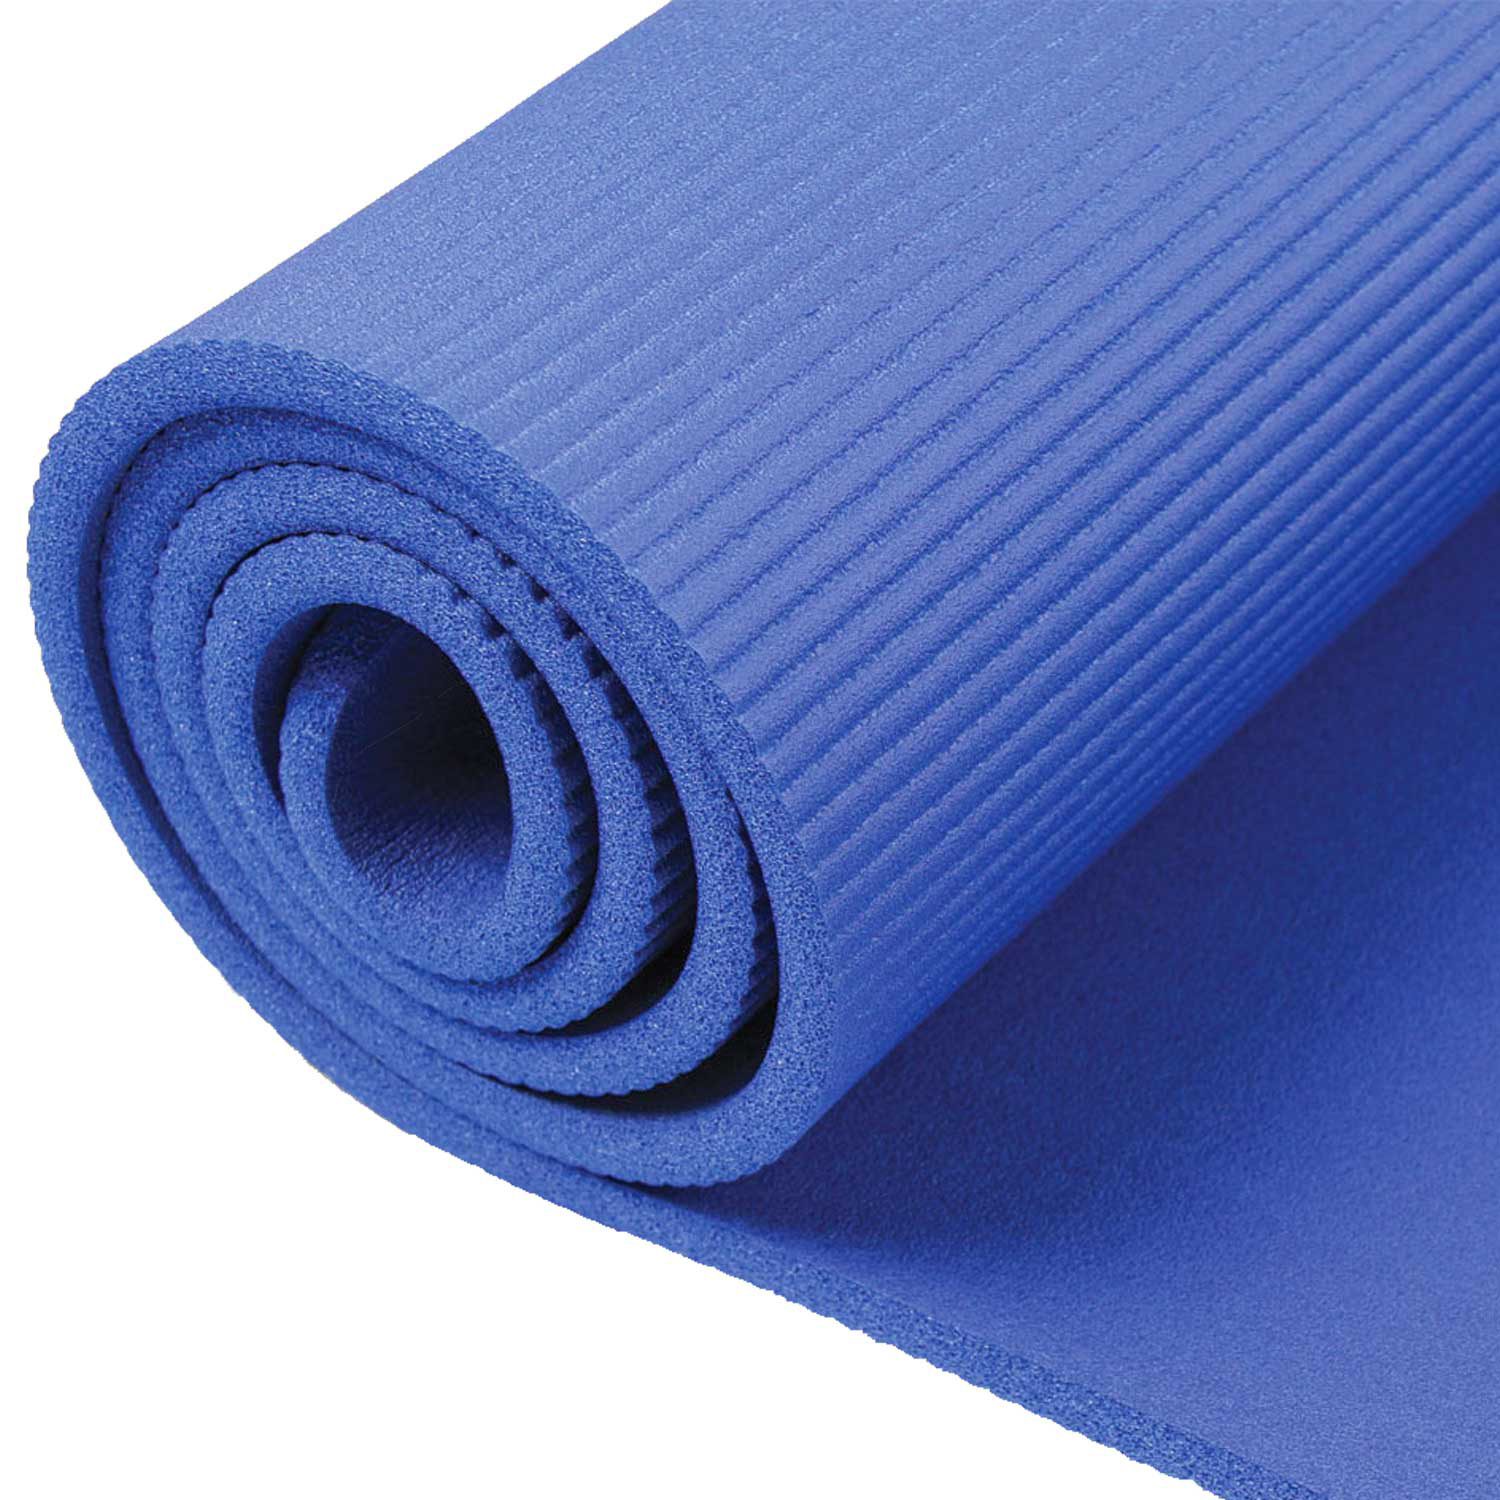 Core Fitness Blue 15mm Mat with Eyelets - Pilates MAD - Exagym